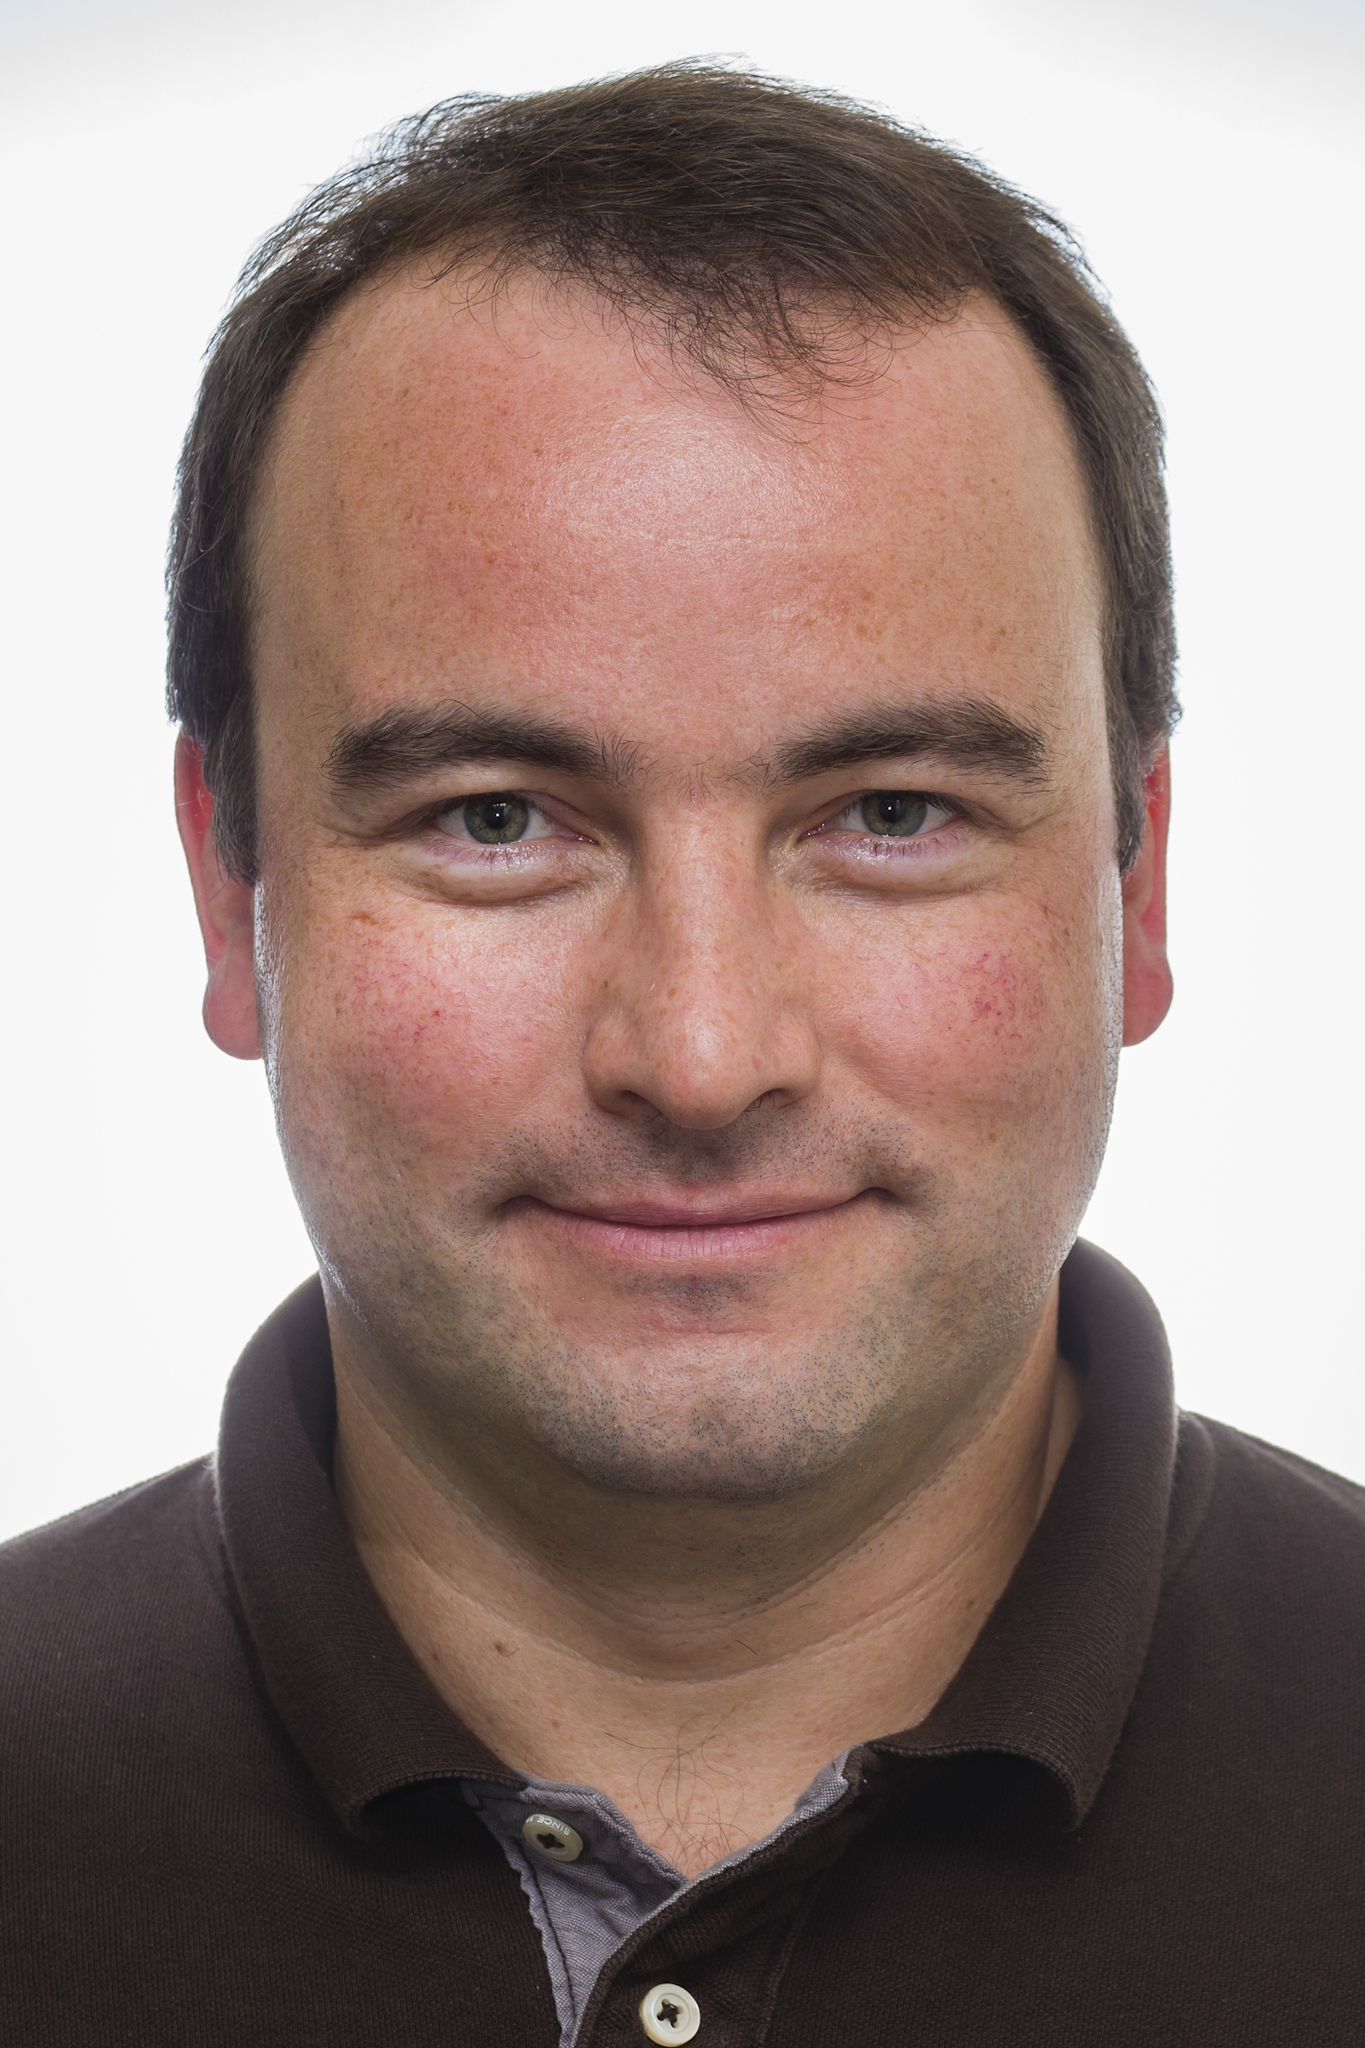 A headshot of smiling Nicholas Tolwinski who has short brown hair. He is wearing a brown polo shirt.